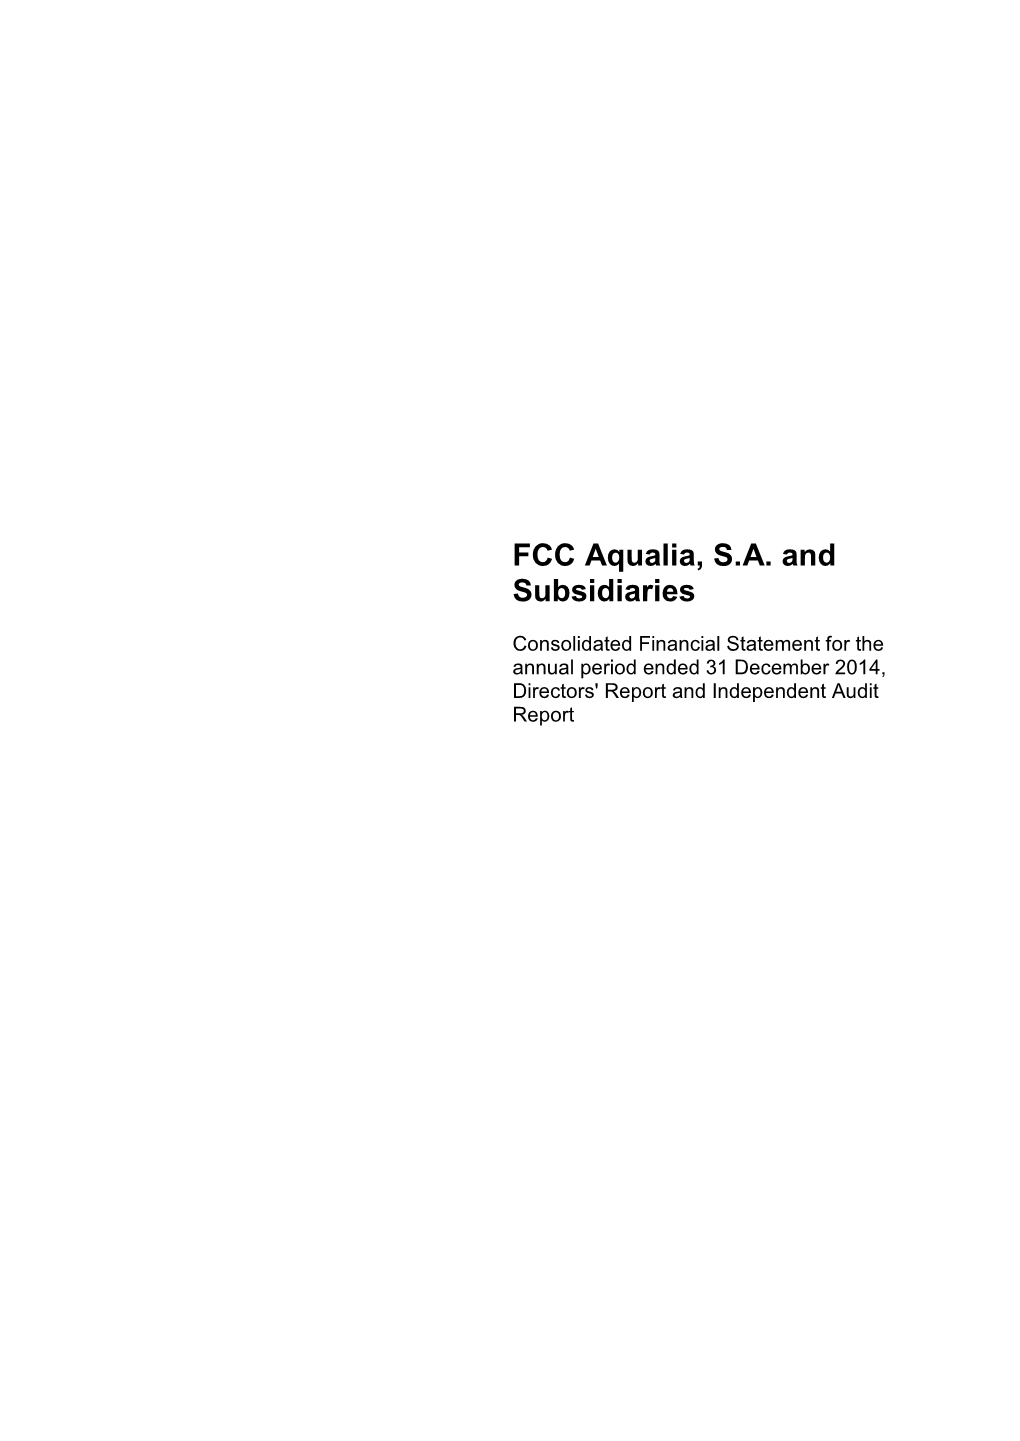 Group FCC Aqualia Audited Consolidated Financial Statements